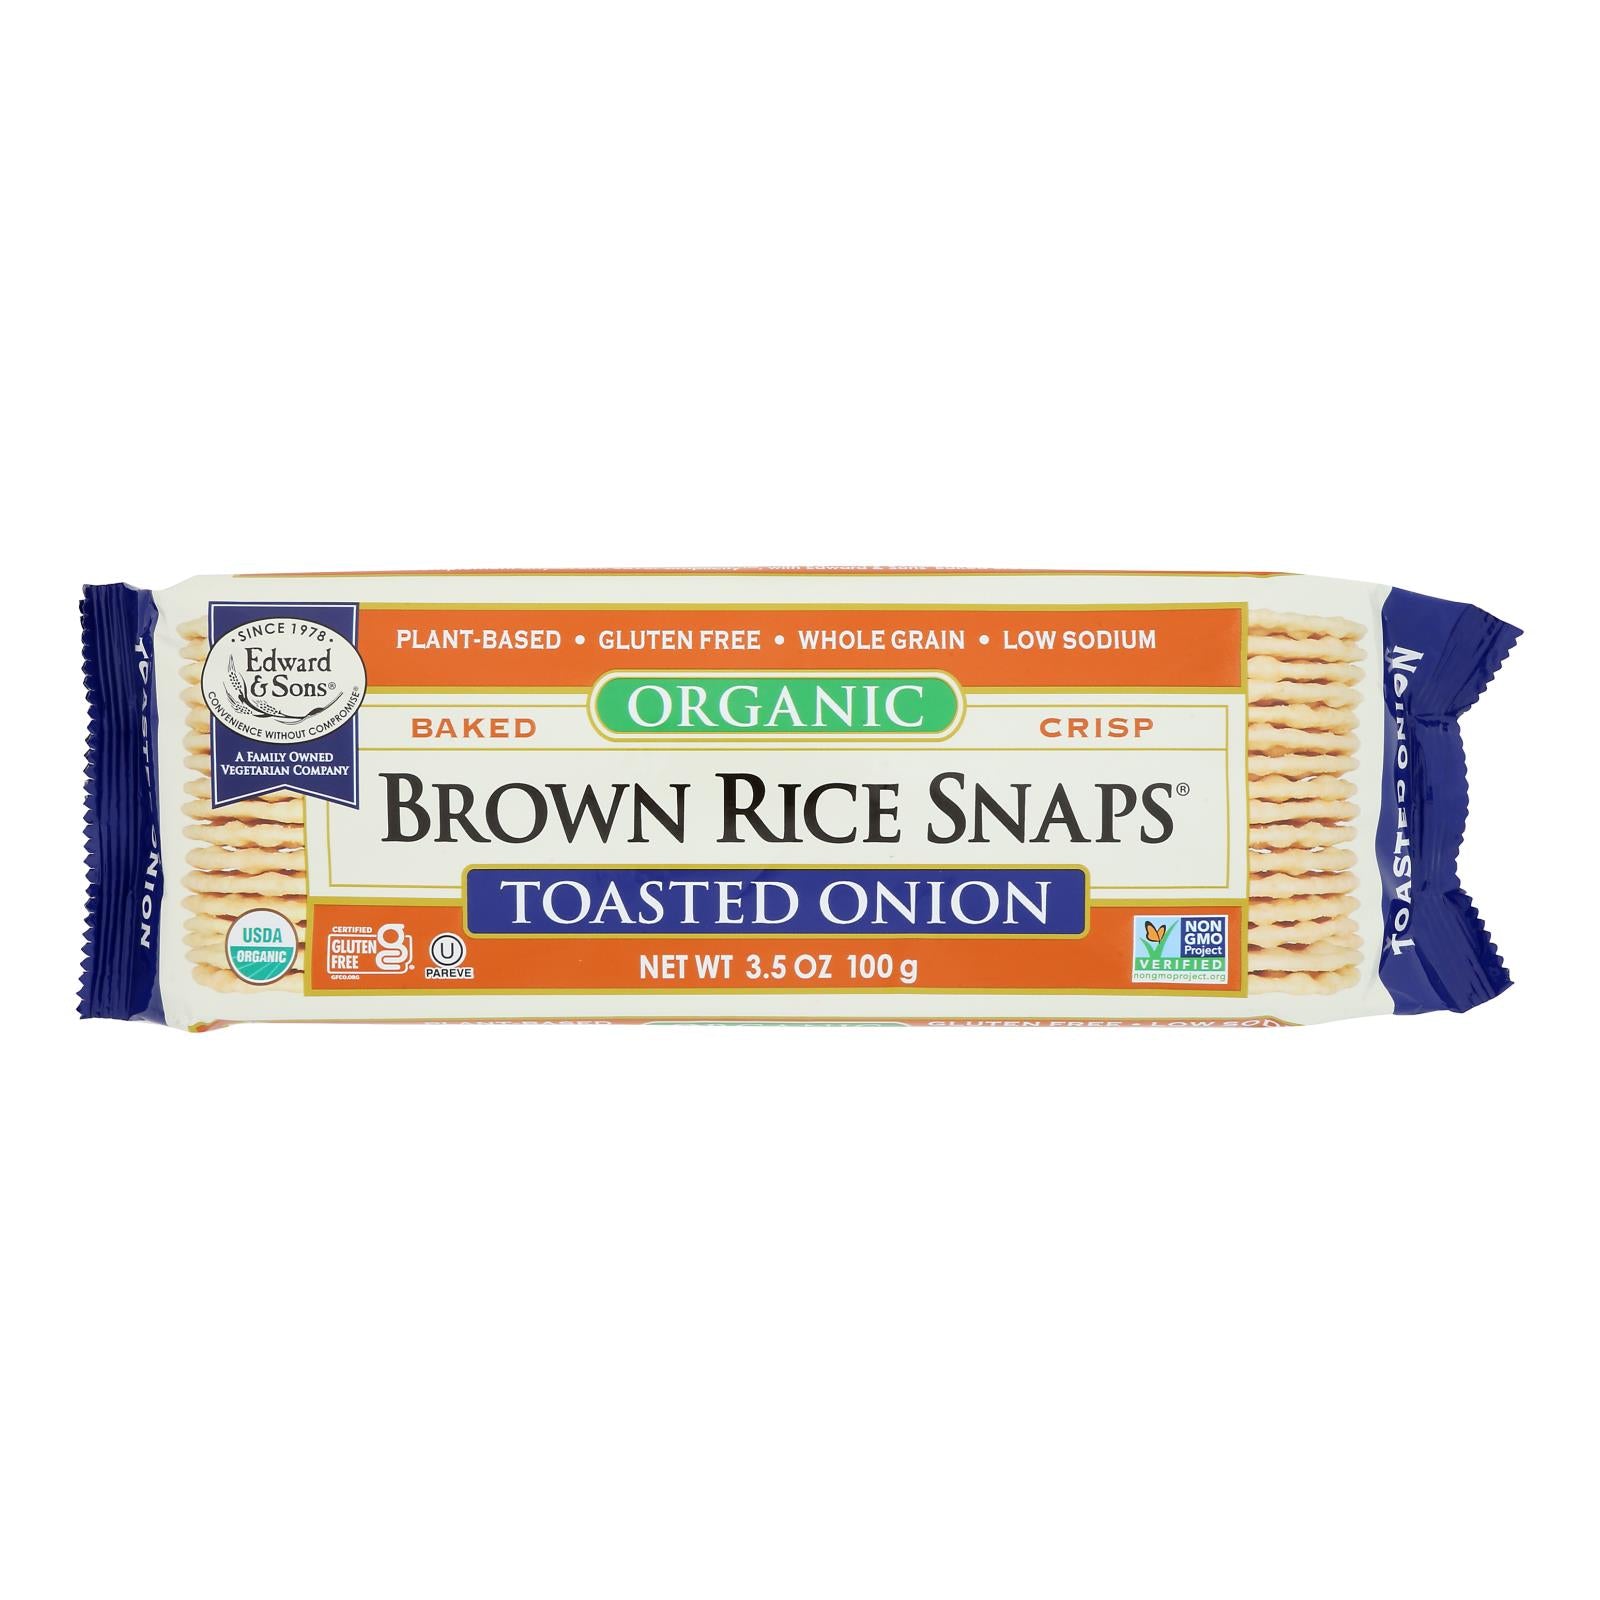 Edward And Sons Brown Rice Snaps - Toasted Onion - Case Of 12 - 3.5 Oz.